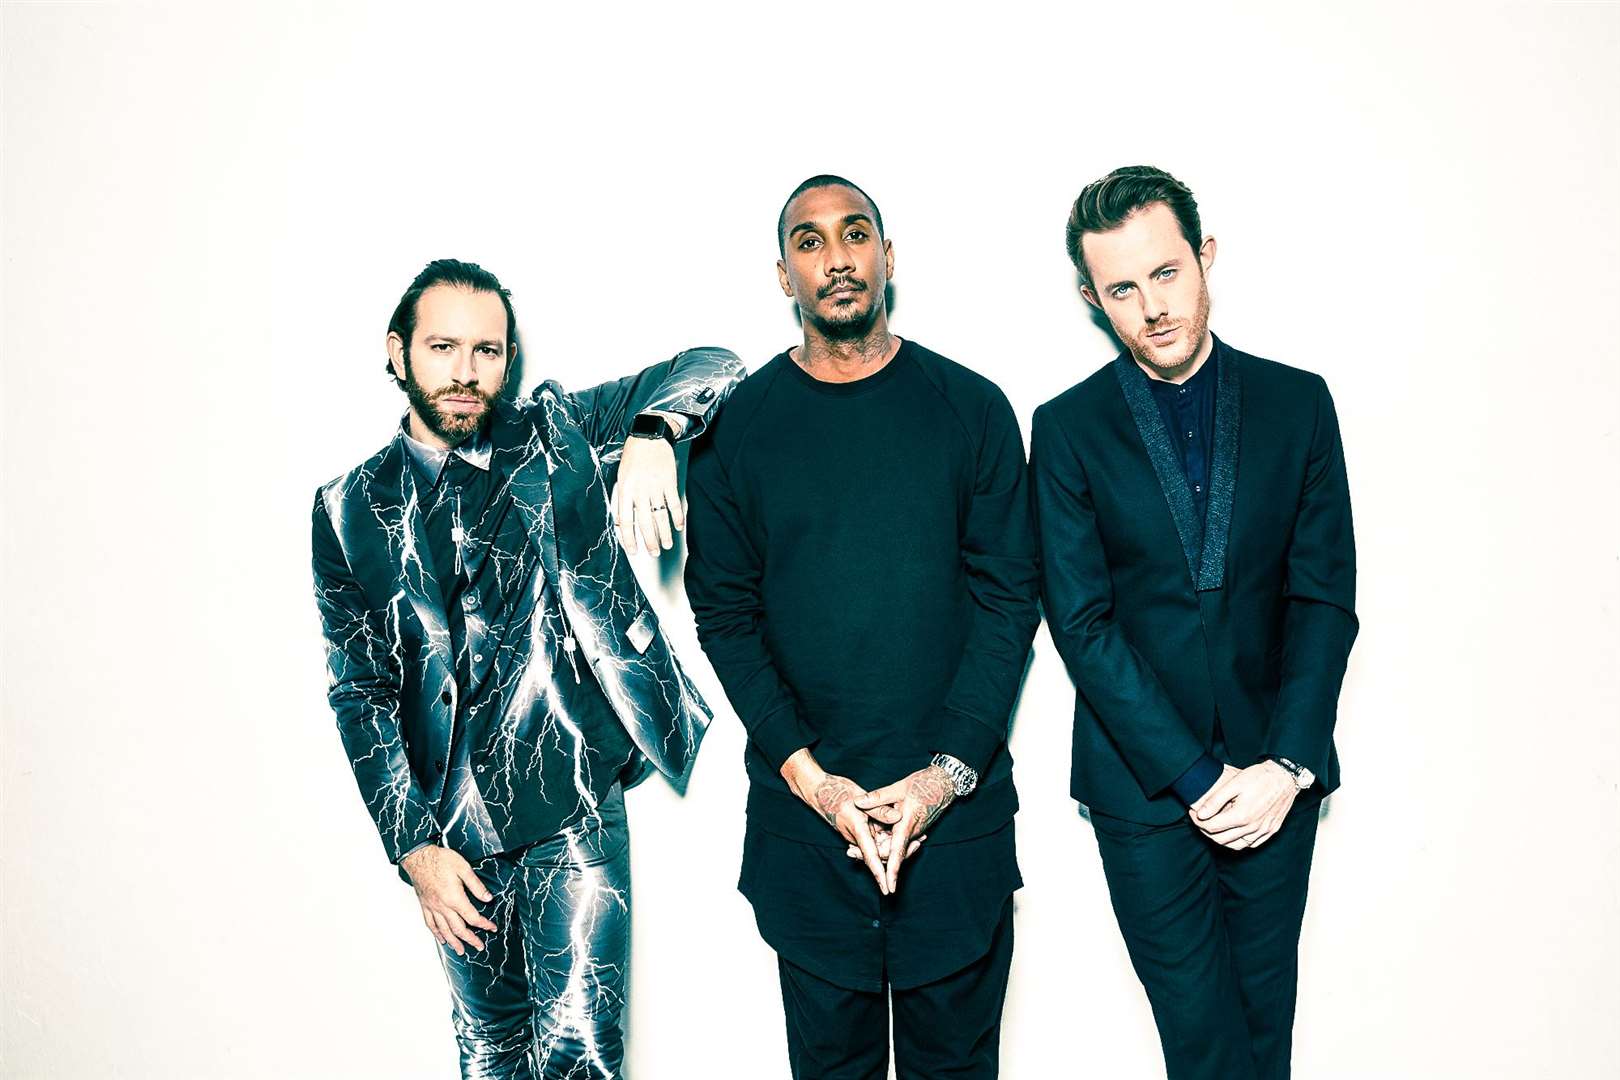 Chase and Status are set to return to Dreamland